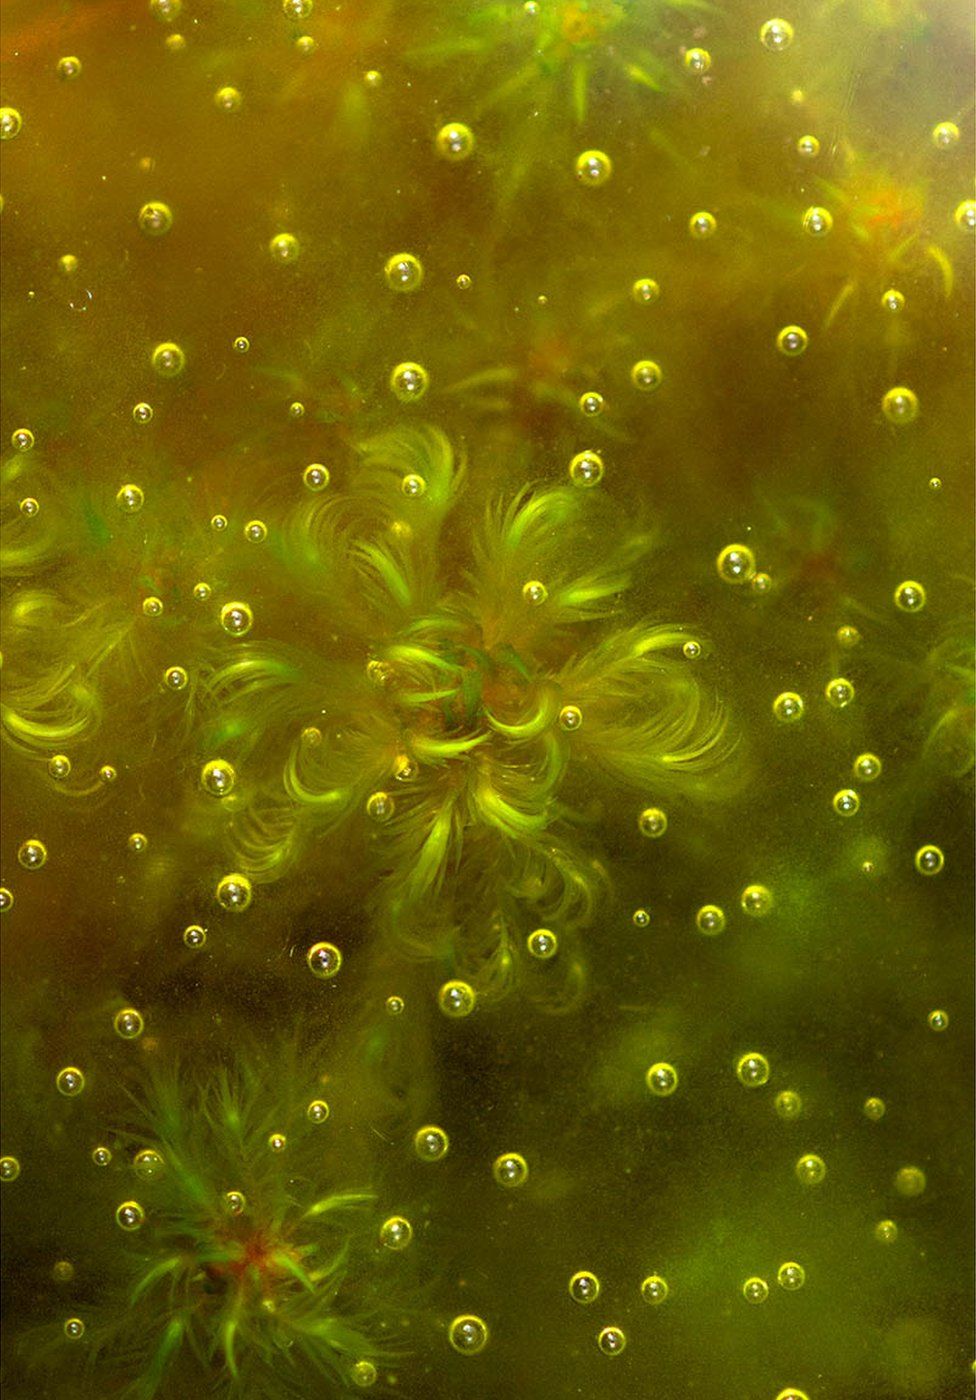 Green moss and bubbles seen in water